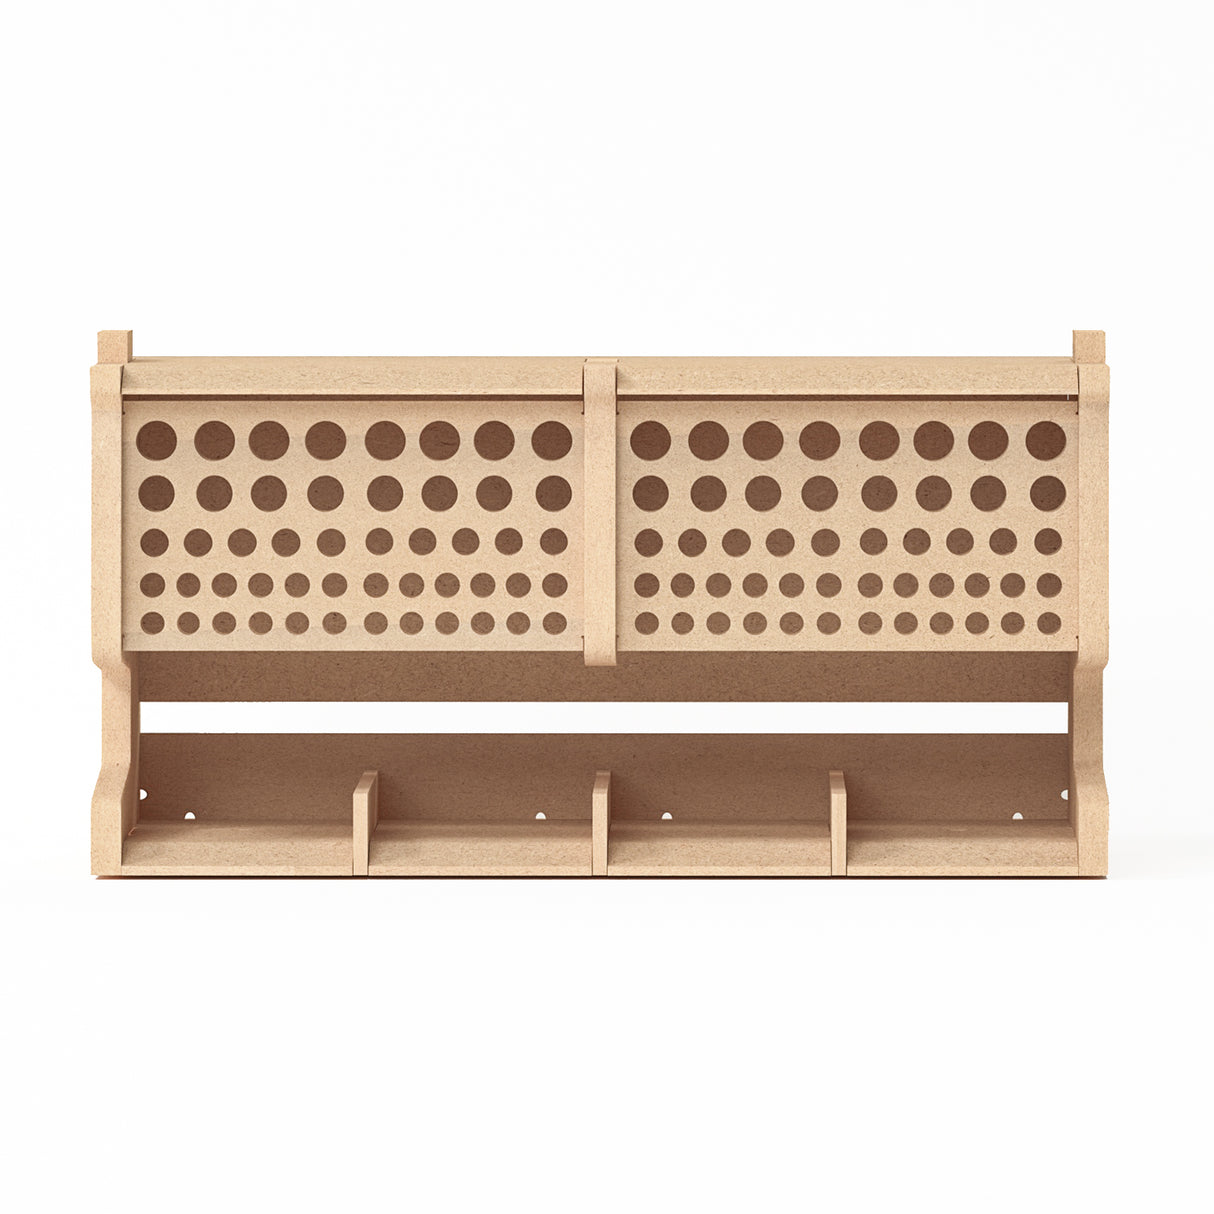 Bucasso Wooden Model Kit Tool Storage Rack with 60 Holes, Brush/Paint  Organizer with MDF Material, Craft Supplies Storage, Brush/Tool Holder,  Suitable